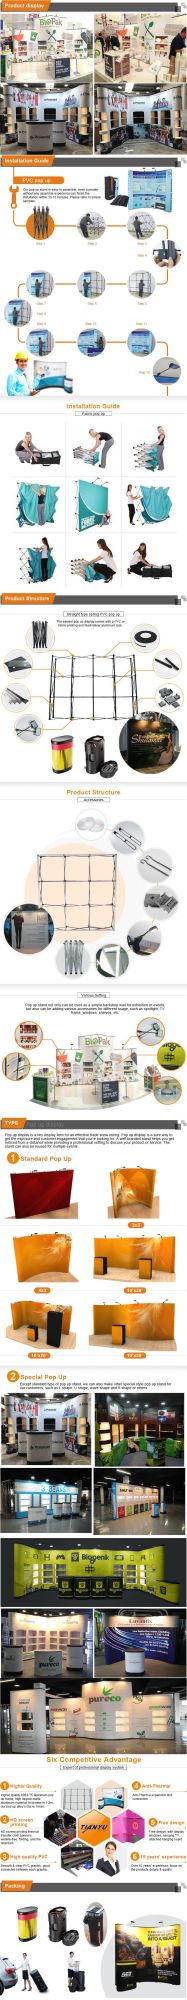 Popup Exhibition Stands and Trade Show Display Portable Exhibit Pop up Stand